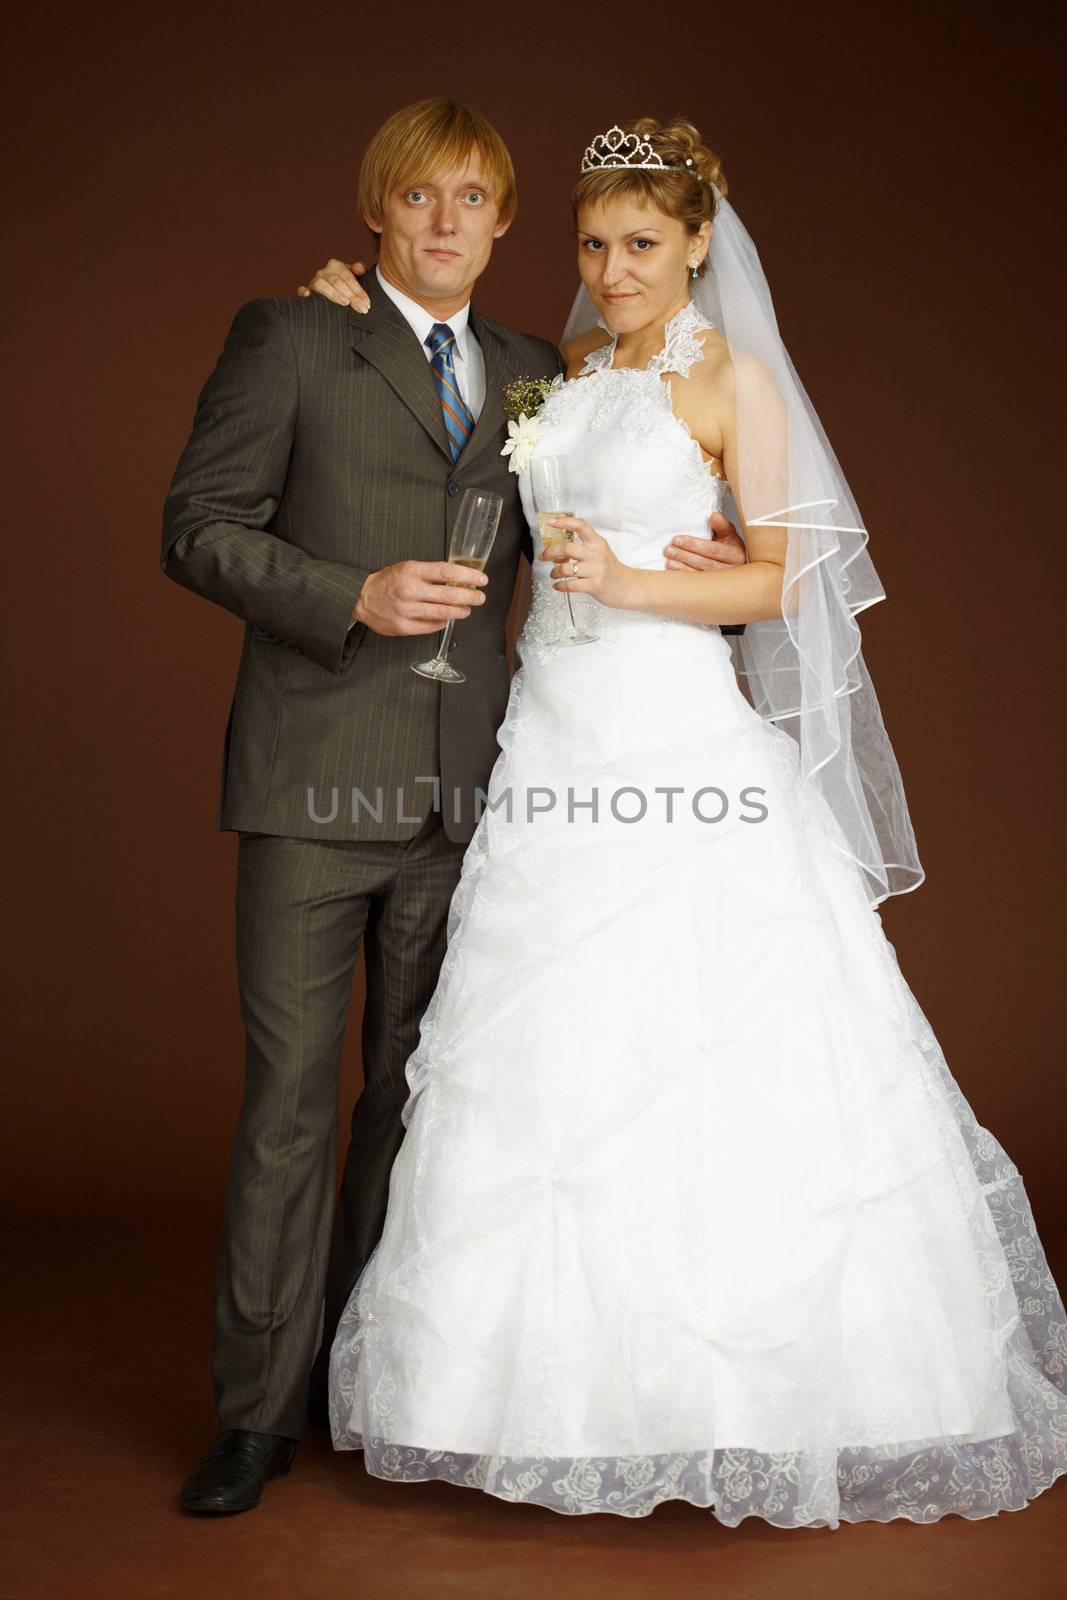 Studio portrait of groom and bride by pzaxe